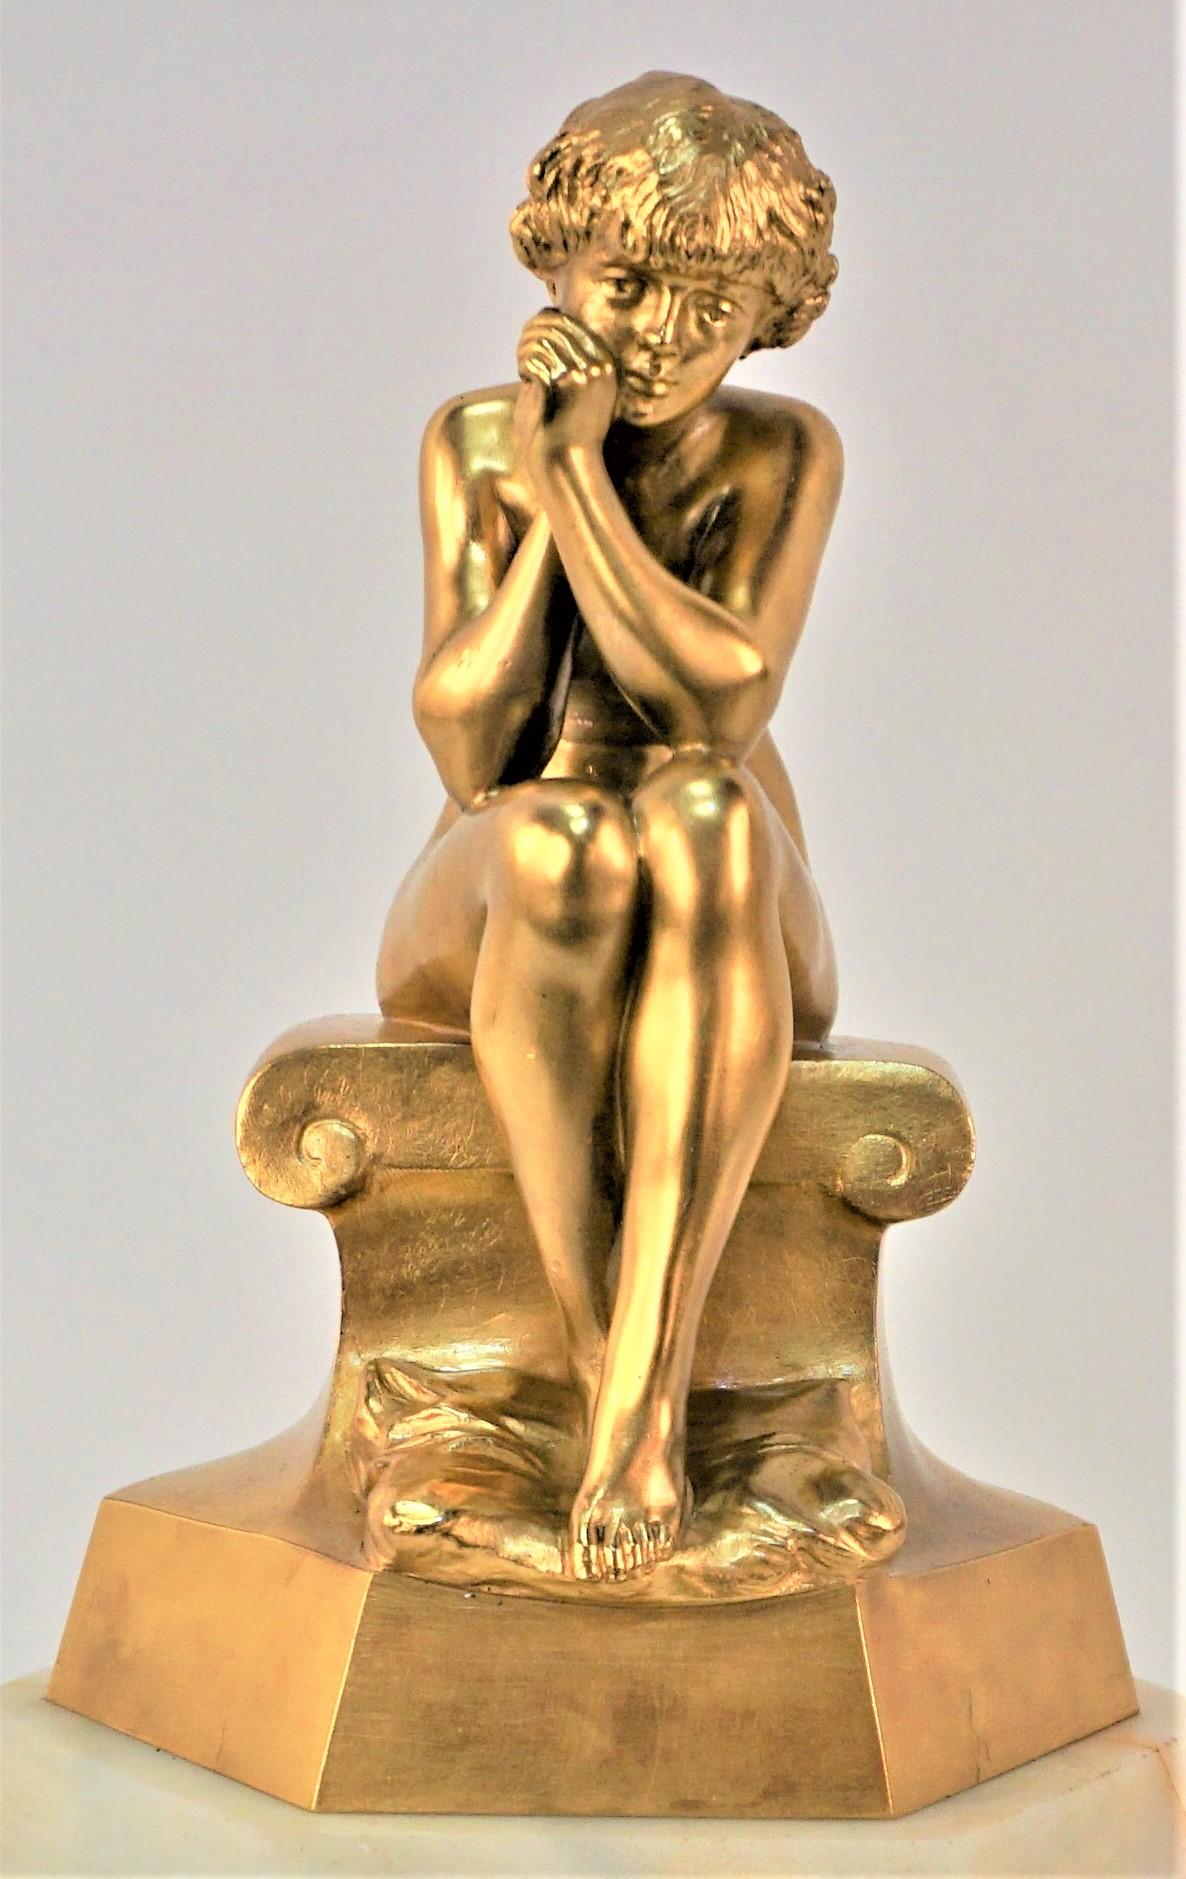 Gilt bronze Sculpture Young man in sitting position over onyx base title (Meditation) by Florentin Louis Chauvet (1878-1958).